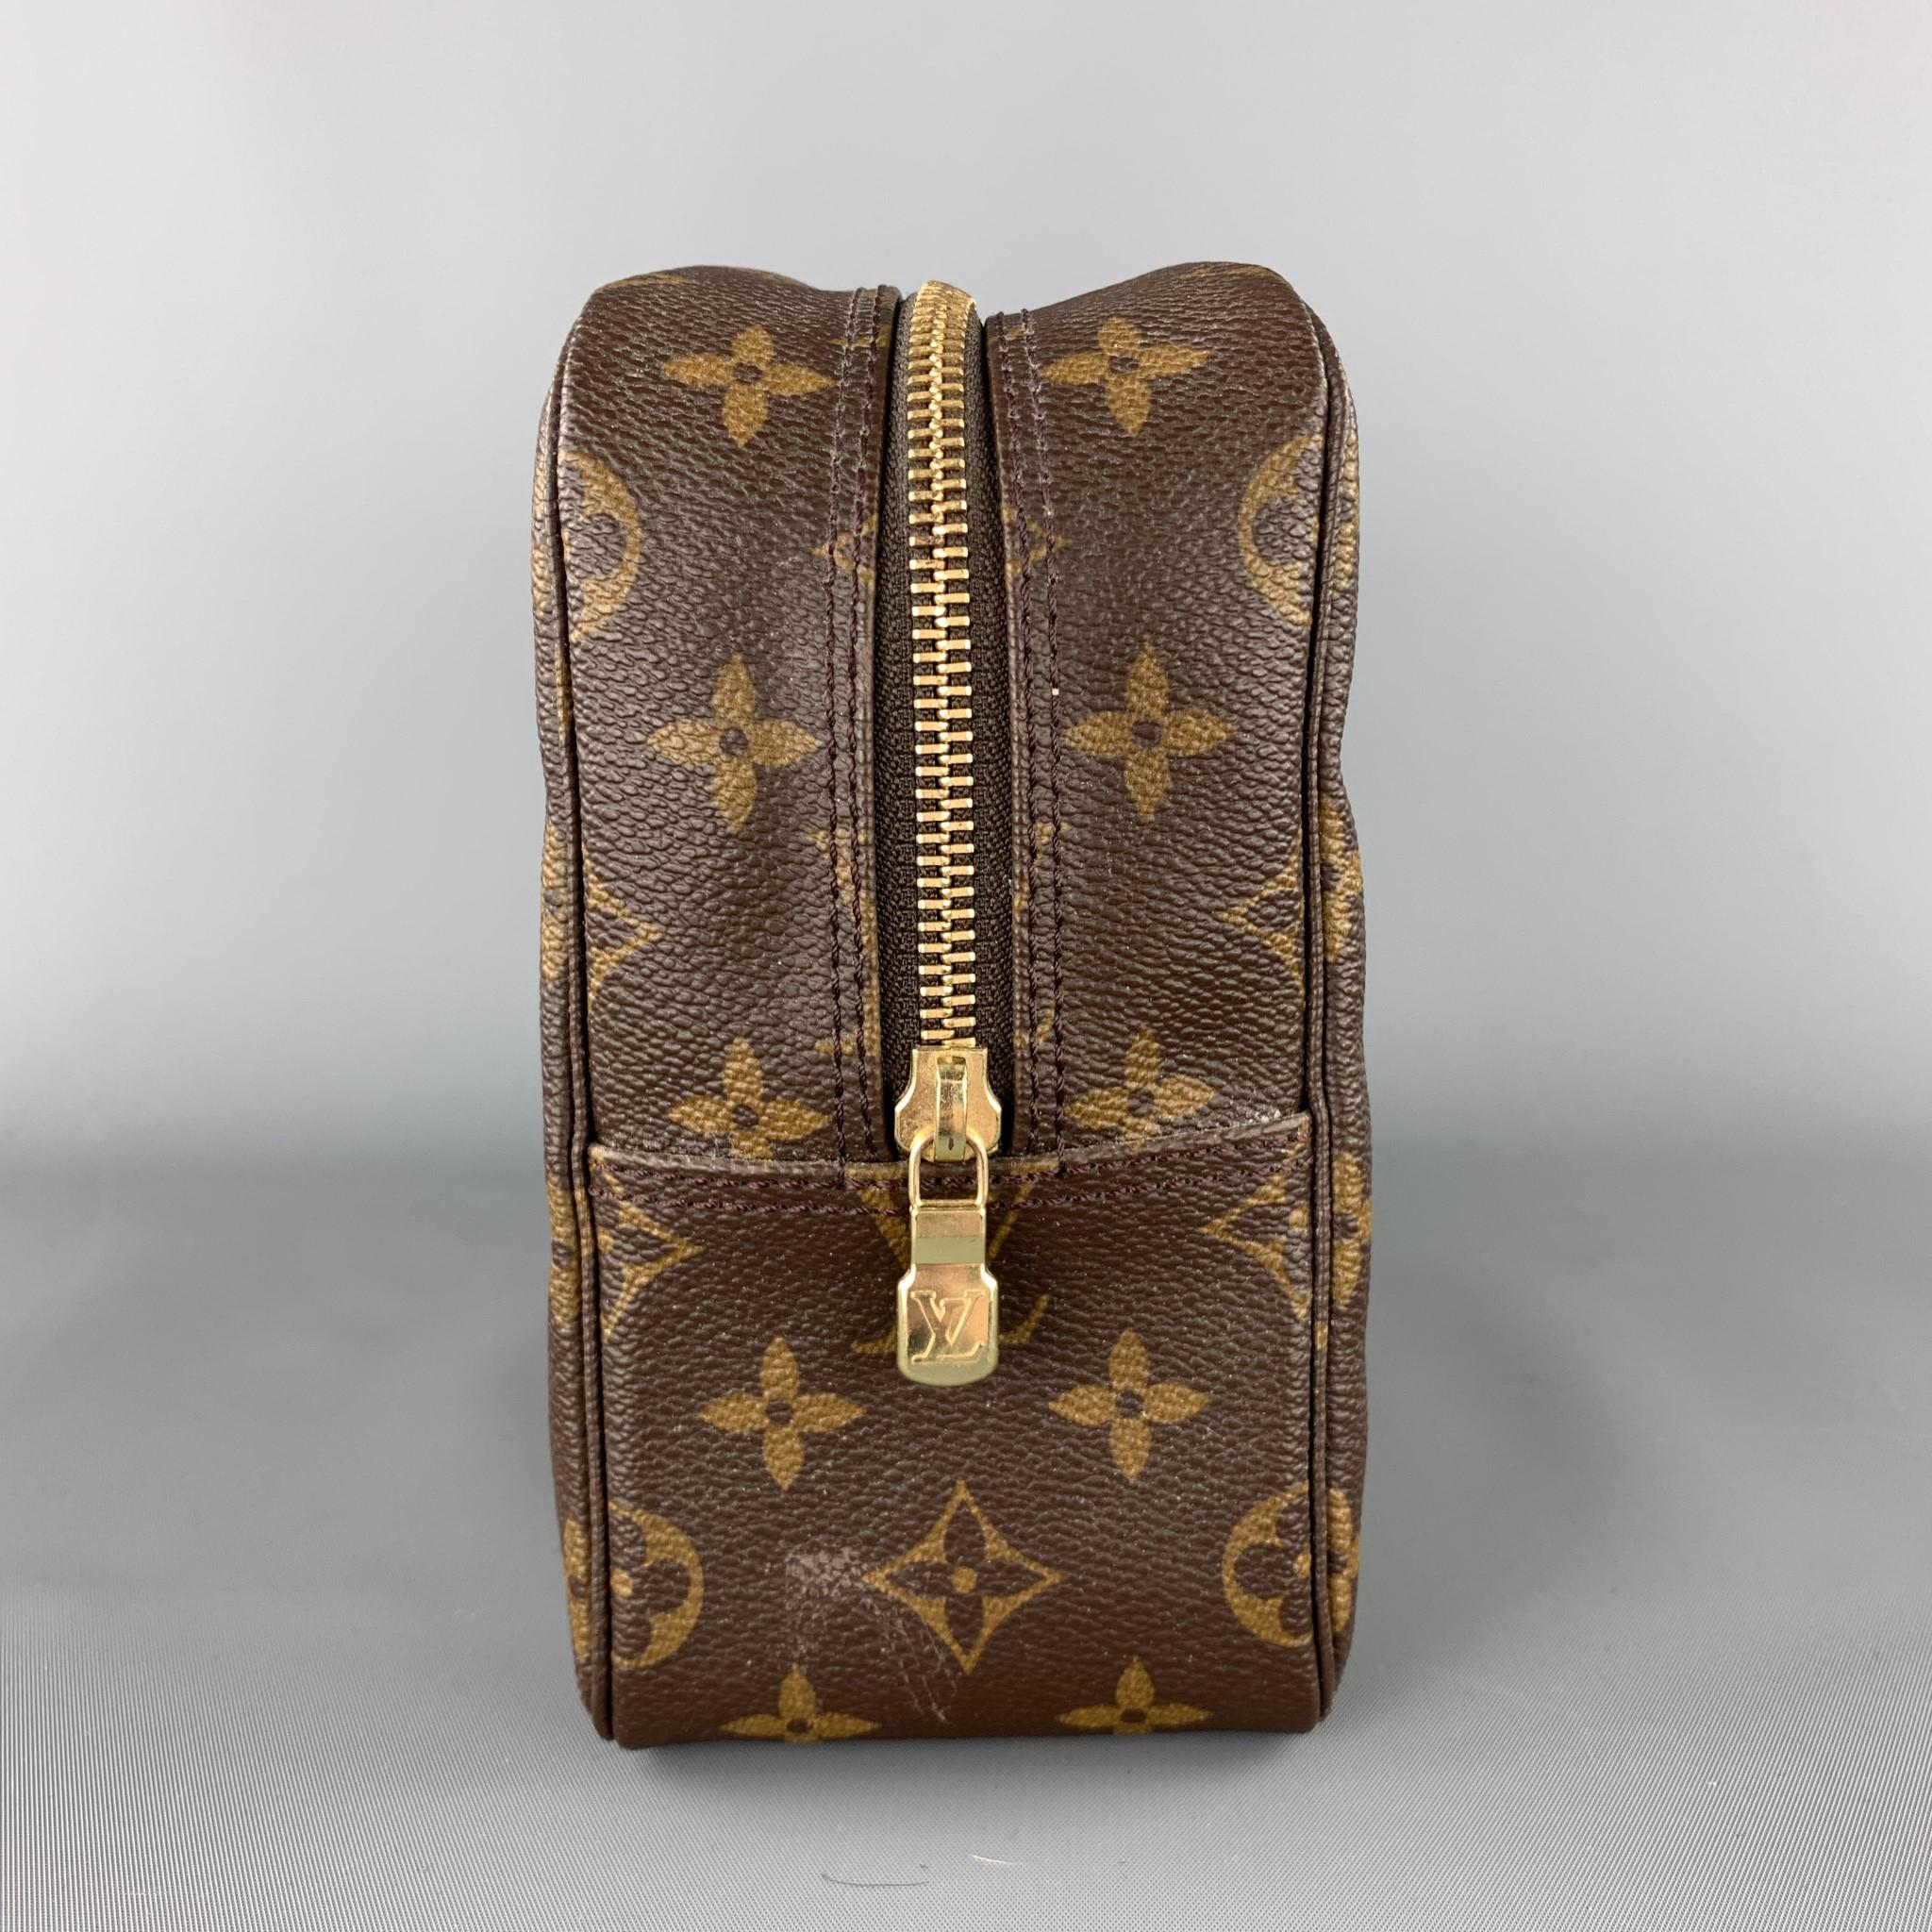 Vintage LOUIS VUITTON toiletries bag coms in classic brown monogram coated canvas with a top zip and beige interior. Wear throughout. As-is. Made in France.

Good Pre-Owned Condition.

Measurements:

Length: 11 in.
Width: 4 in.
Height: 7 in. 
SKU: